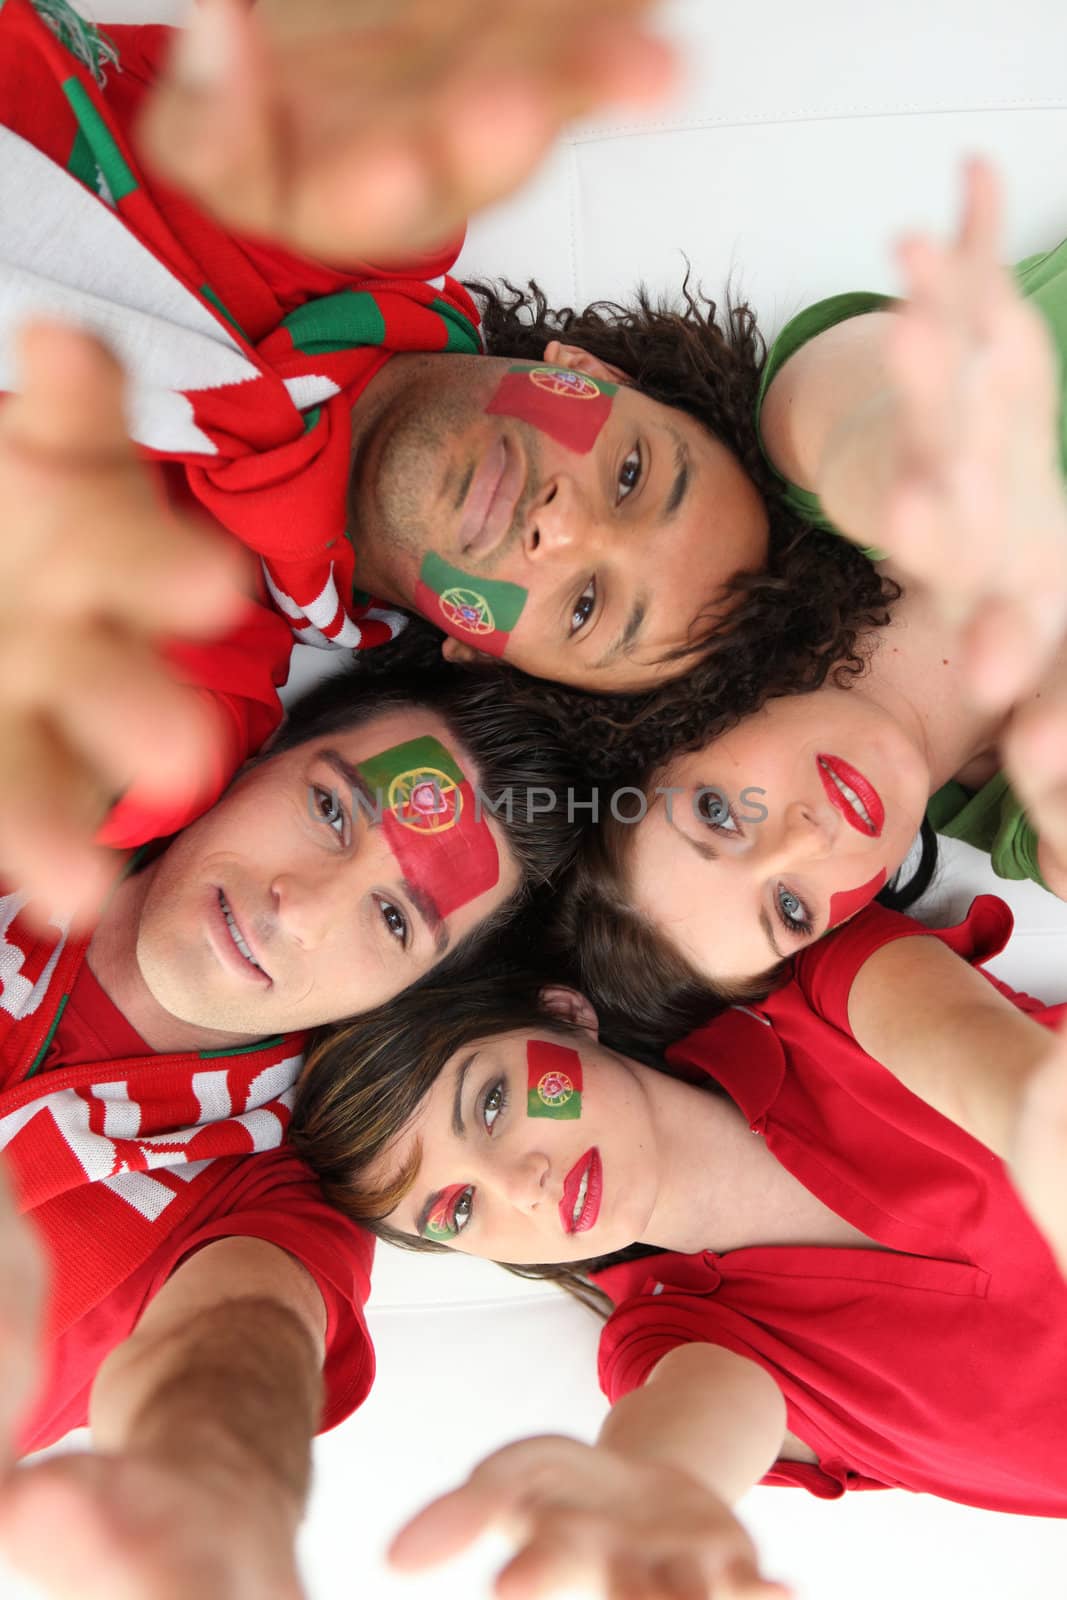 Portuguese football supporters by phovoir